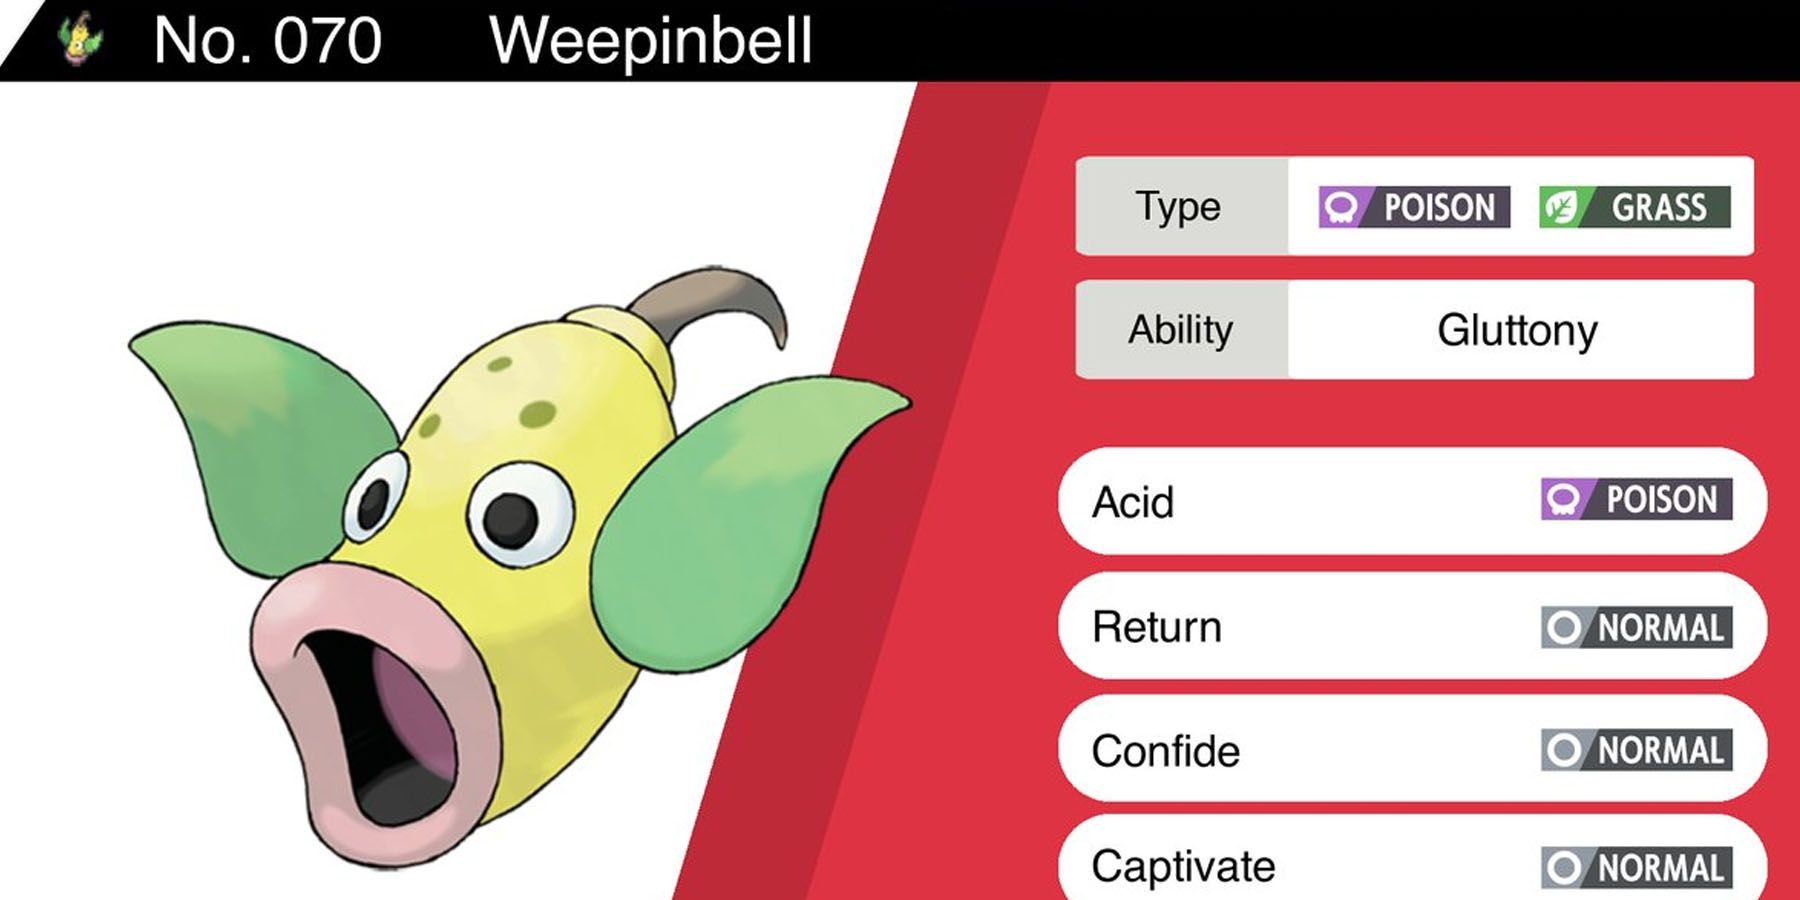 Weepinbell with the Gluttony Ability